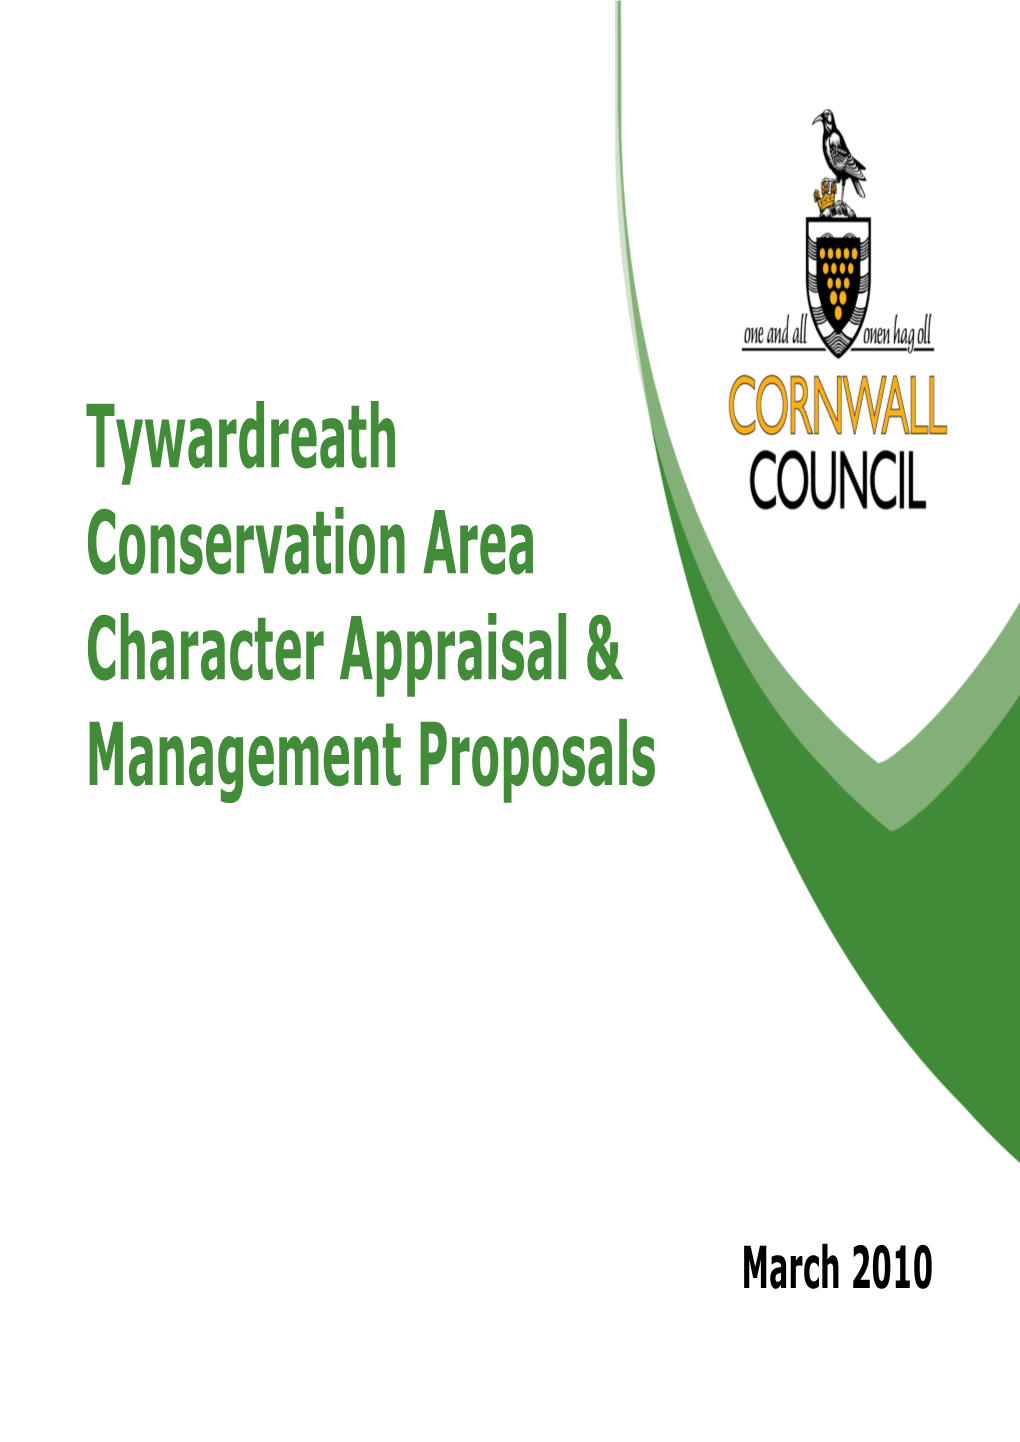 Tywardreath Conservation Area Character Appraisal & Management